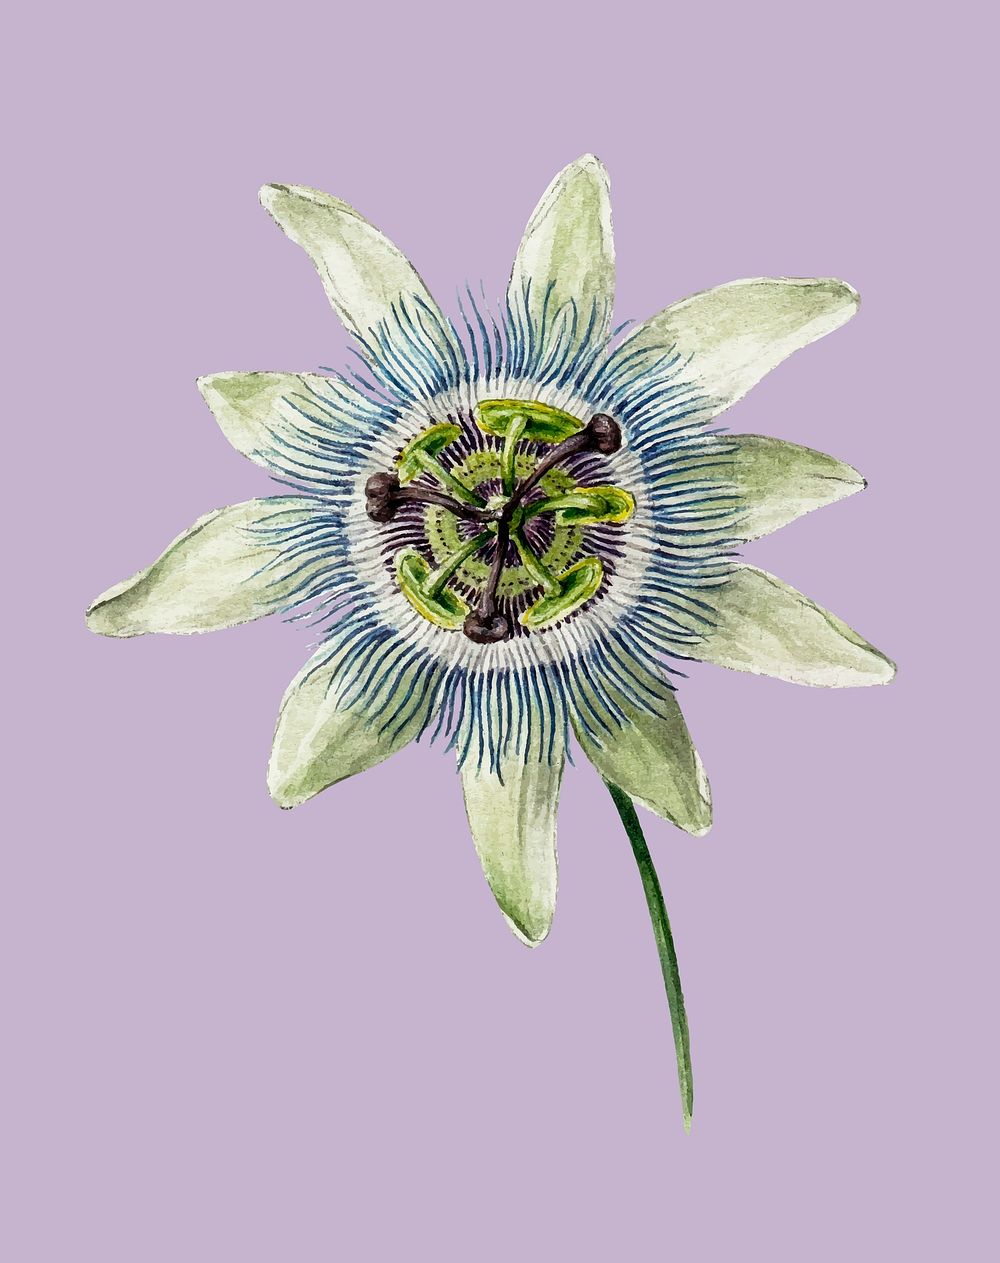 Passion Flower (1825) by Jean Bernard (1775-1883). Original from the Rijks Museum. Digitally enhanced by rawpixel.